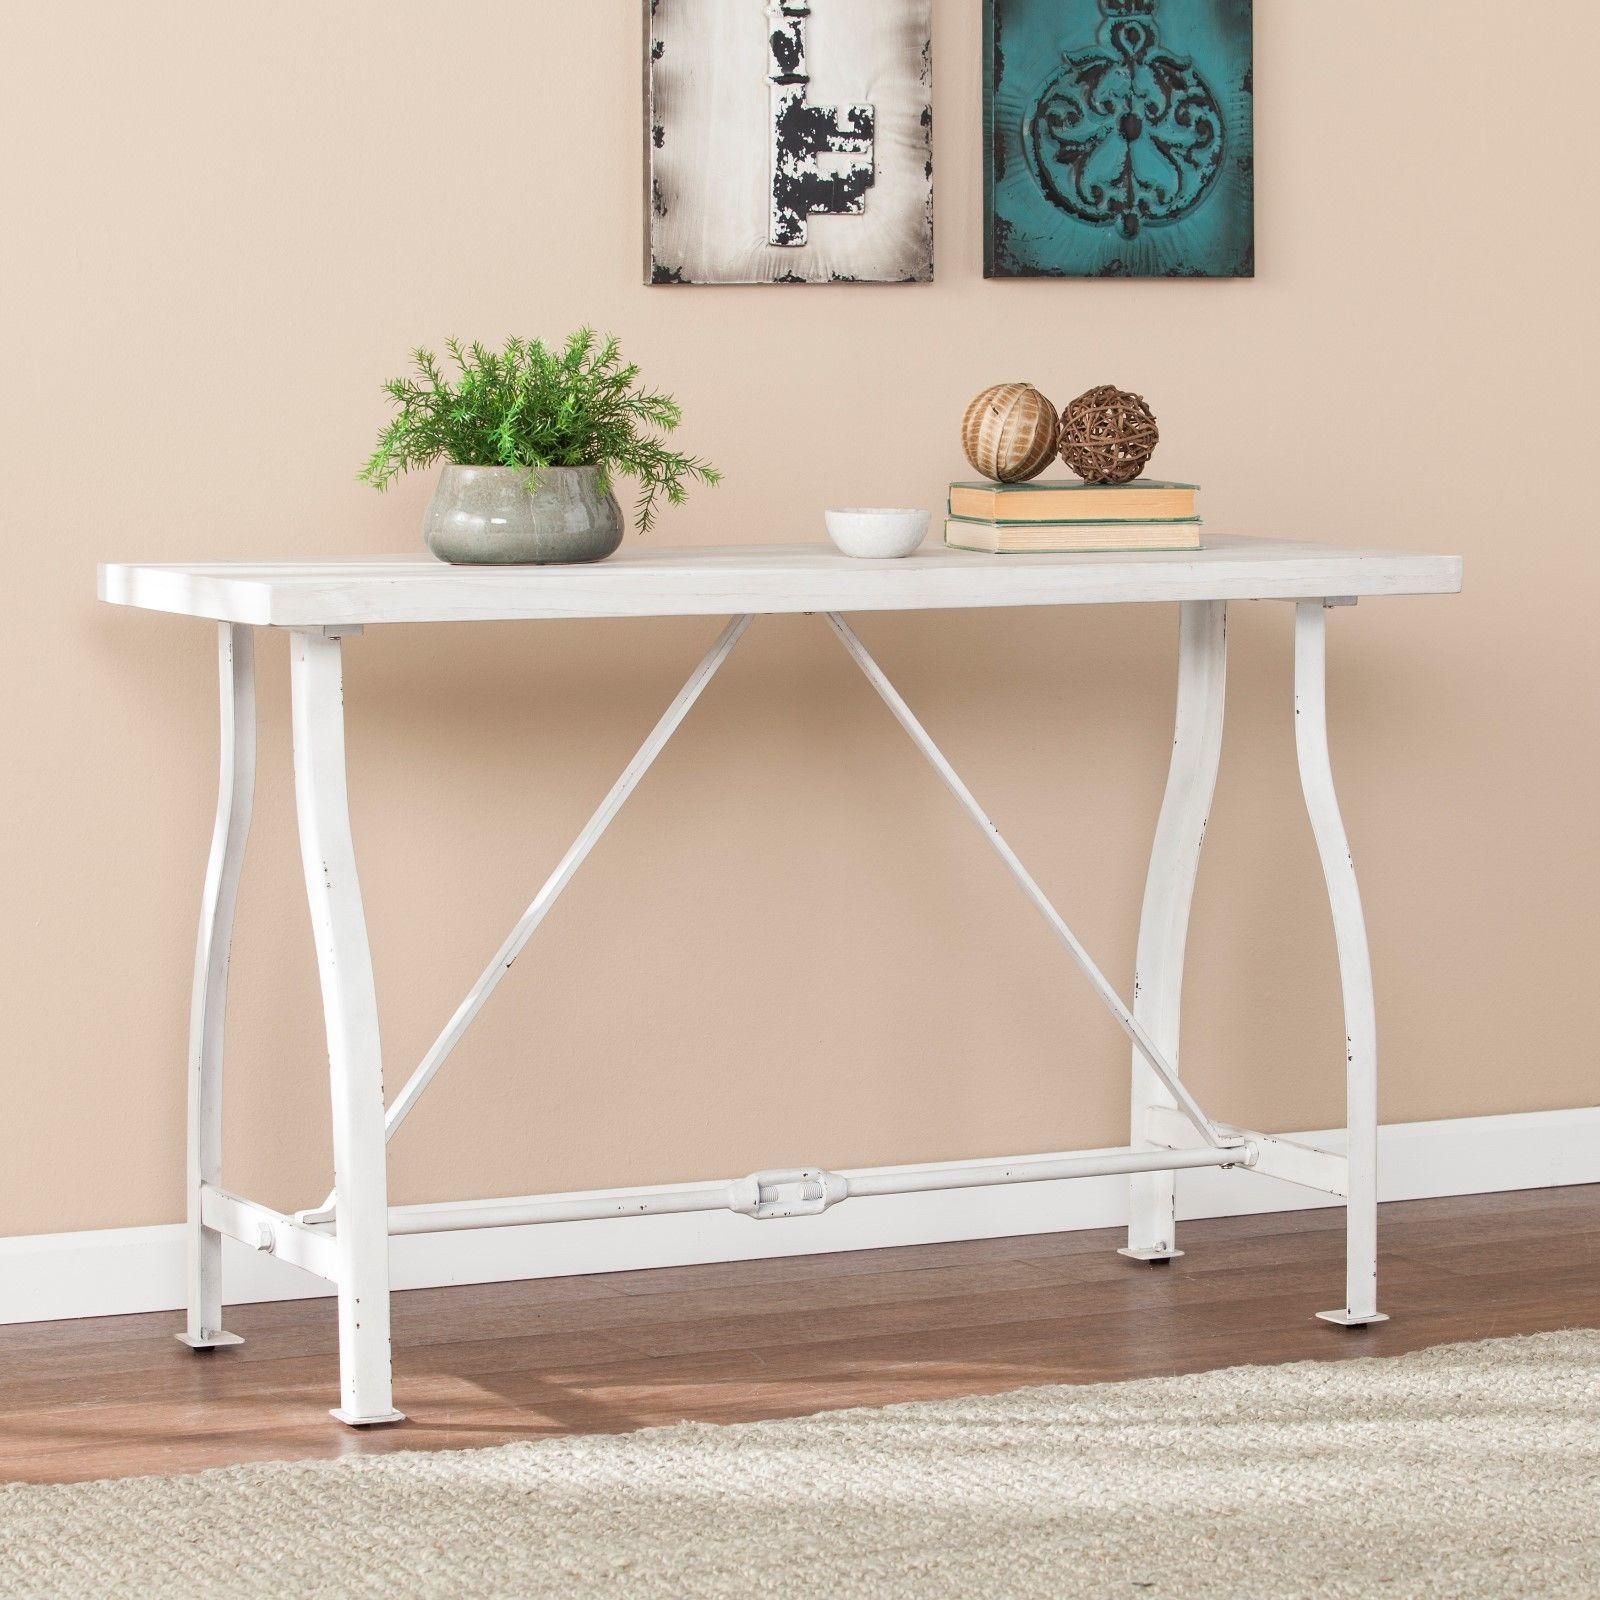 White Triangular Console Tables In Most Current Cst45901 Farmhouse Style Console Table – Distressed White (View 3 of 10)